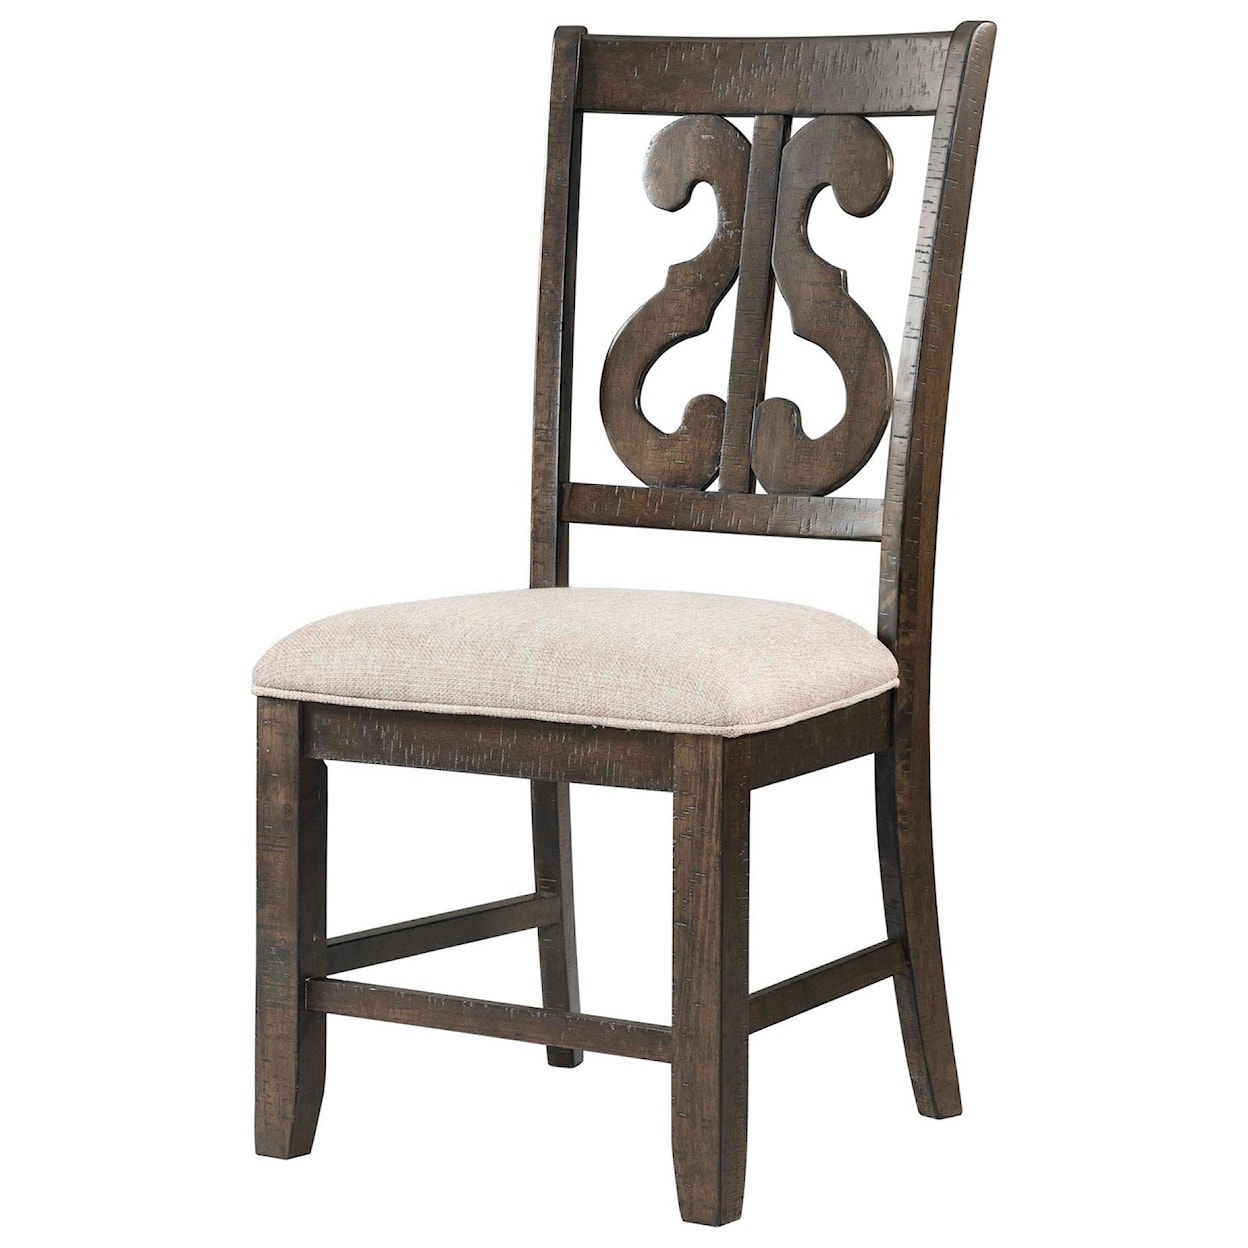 Elements Stone 5-Piece Dining Table and Chair Set